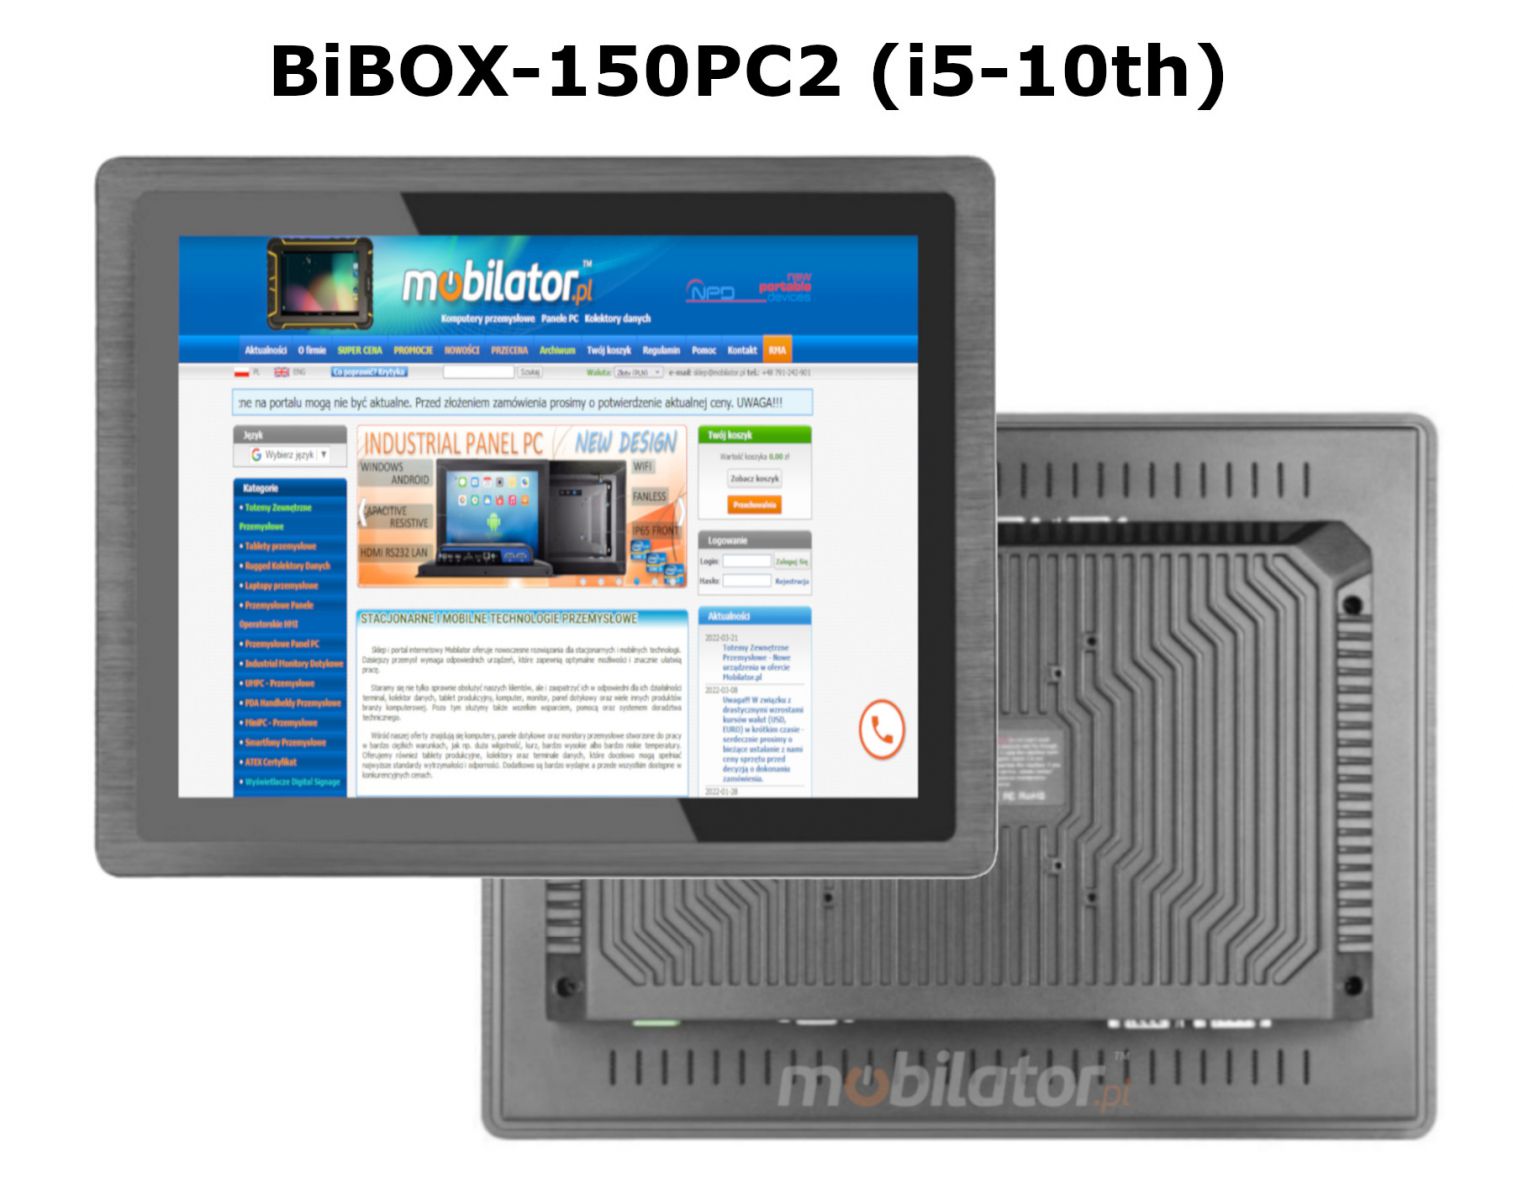 BIBOX-150PC2 spacious, fast and efficient PC panel with WINDOWS 10 PRO license